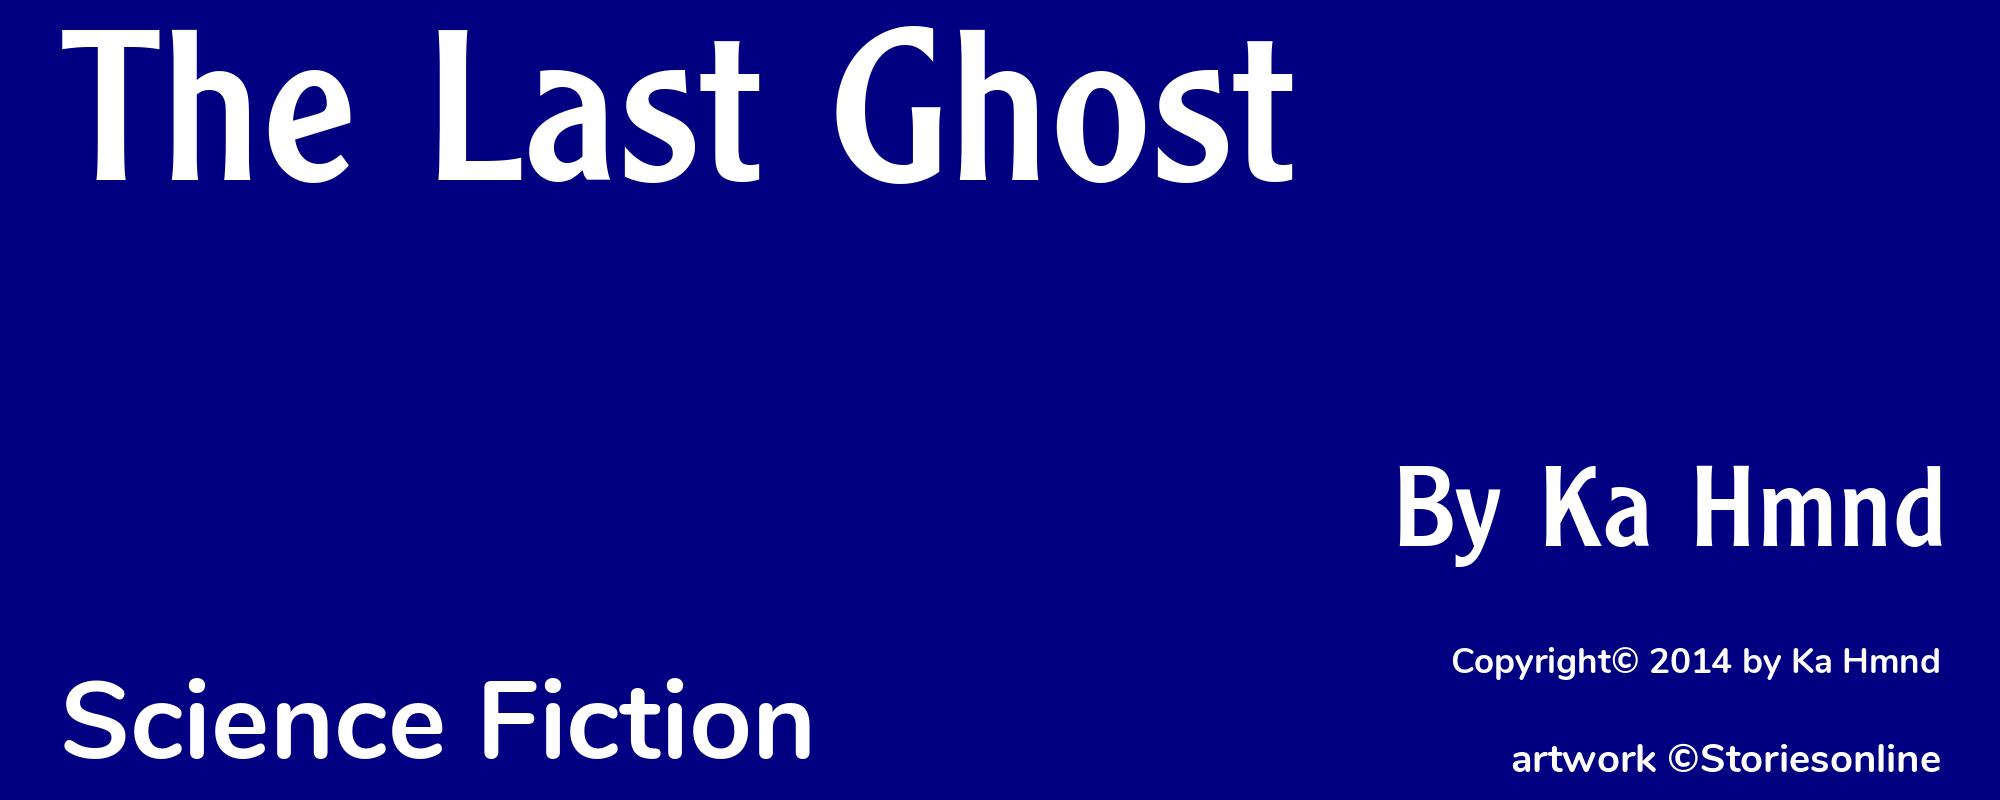 The Last Ghost - Cover